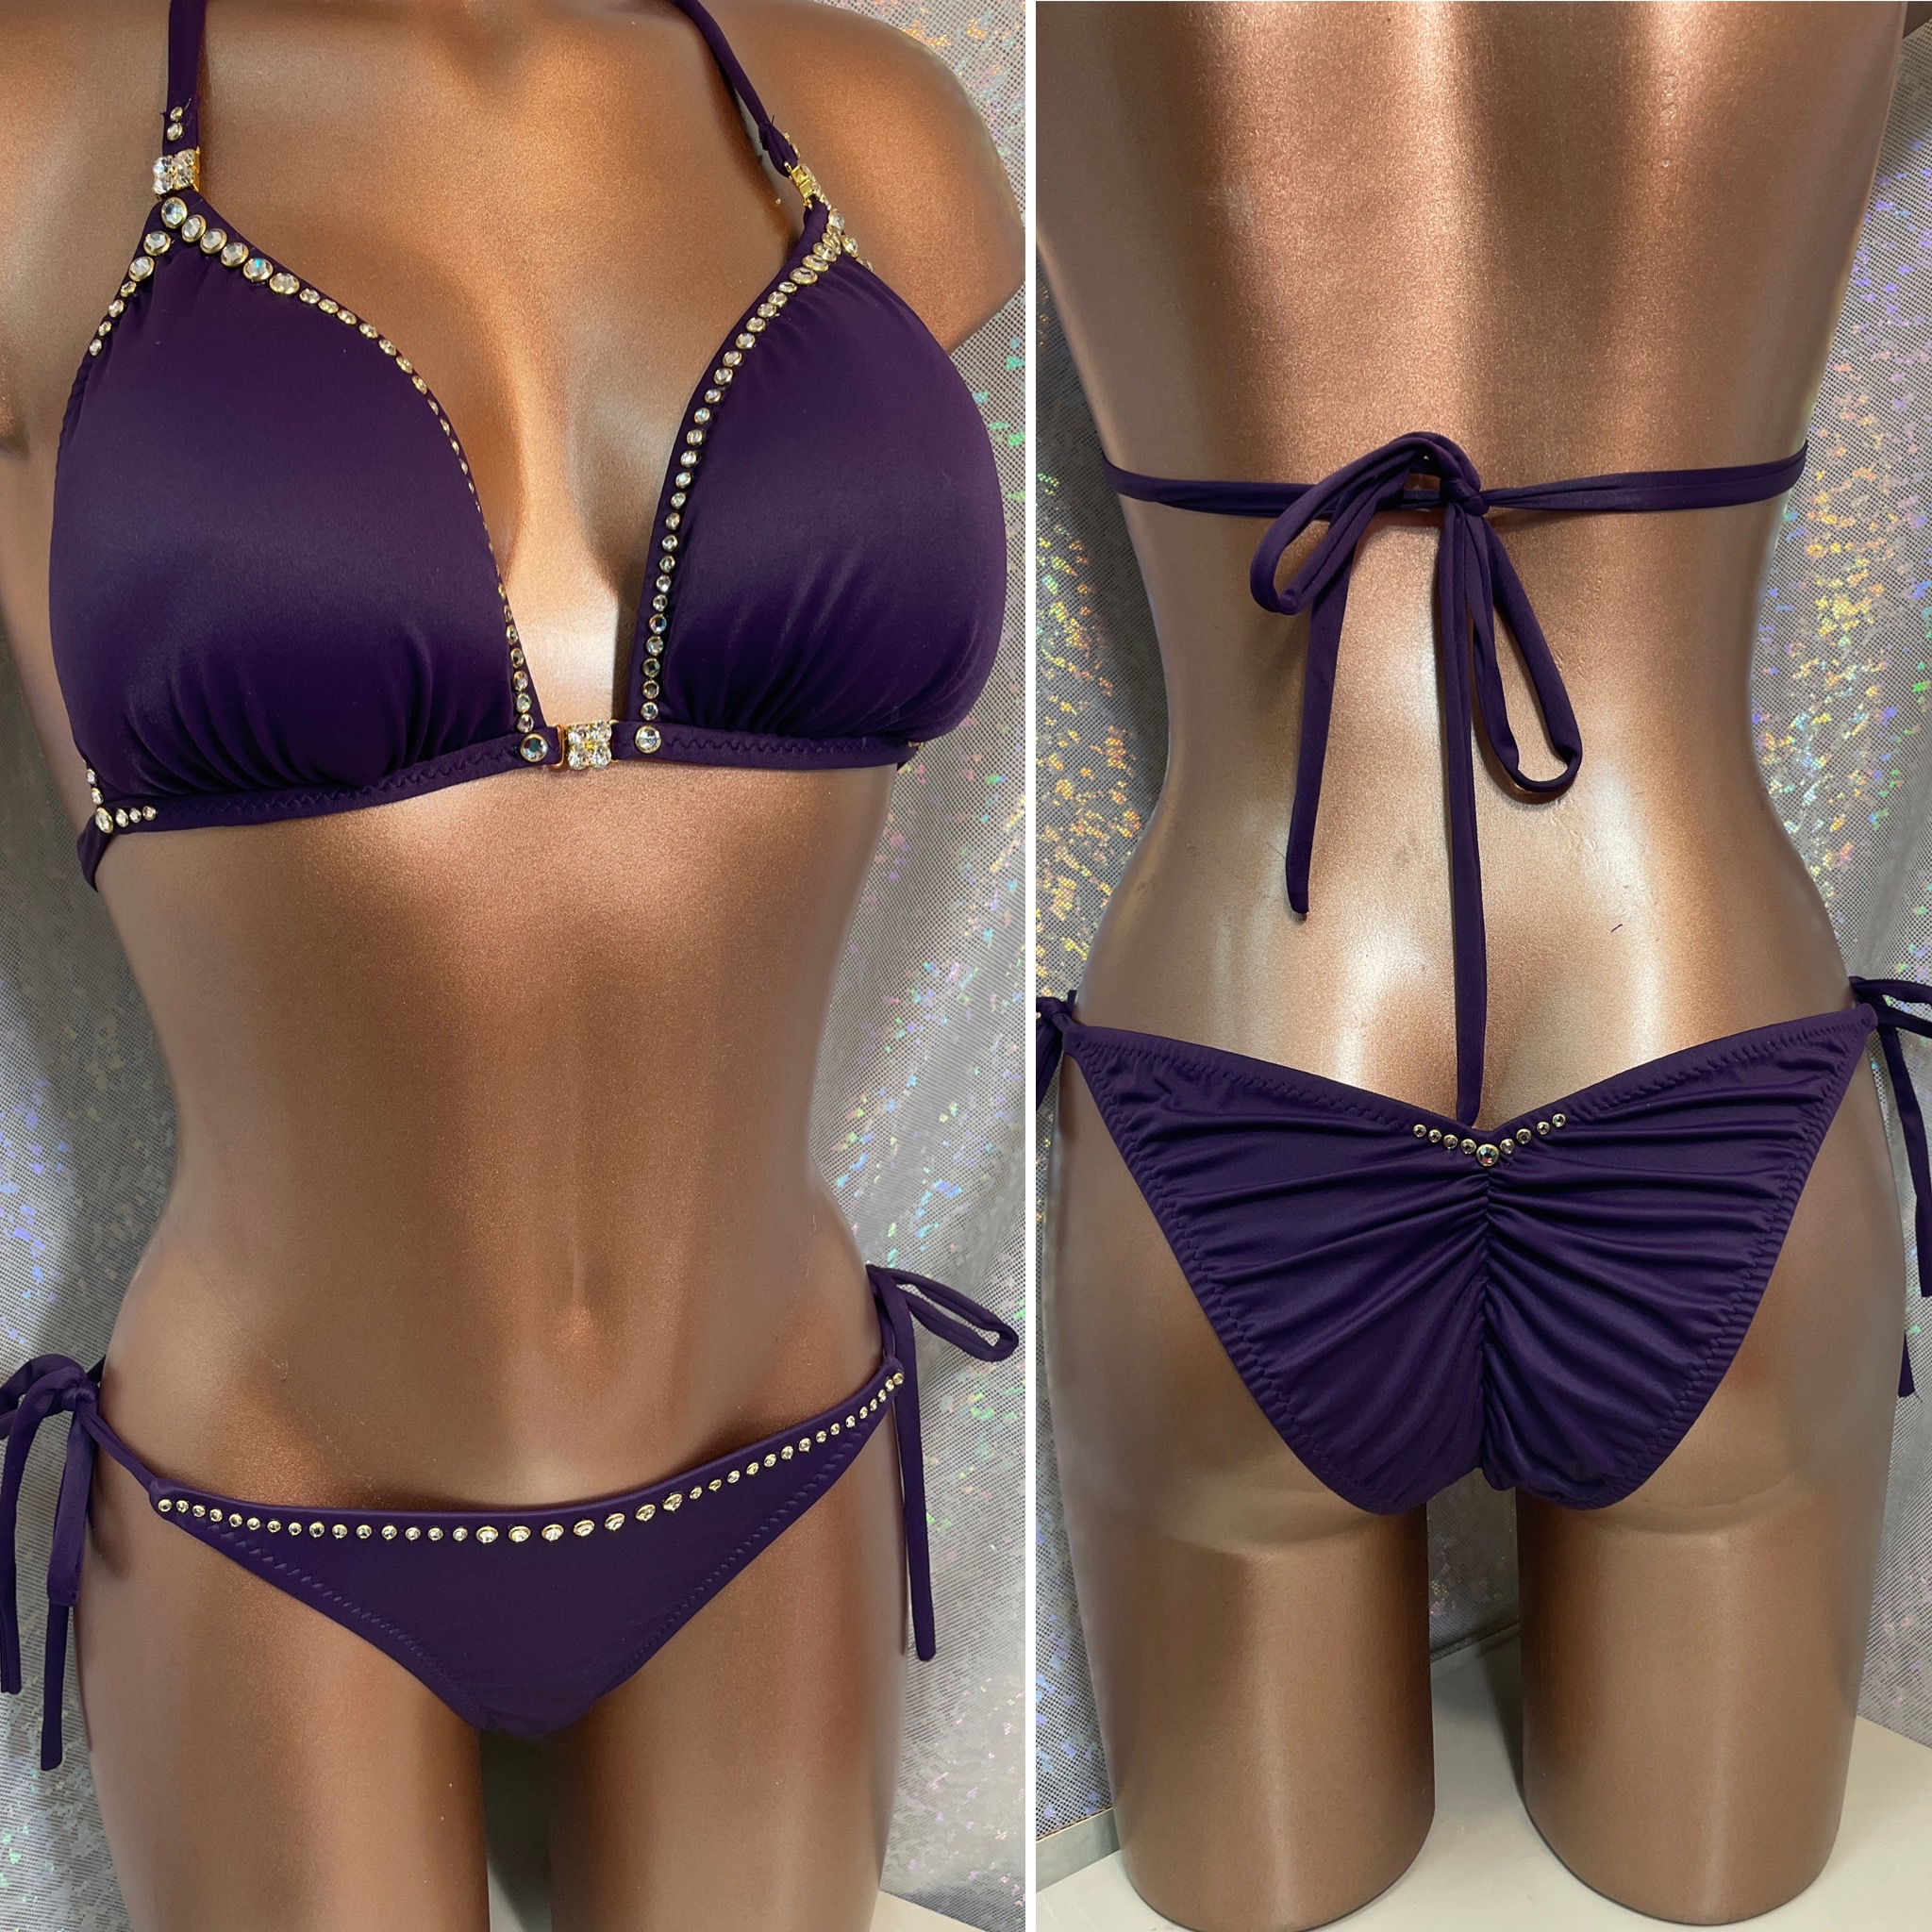 2.
D banded top
tall tie side scrunch back
eggplant purple with crystal/gold rimmed rhinestone accents
$165    ( can order in any color)